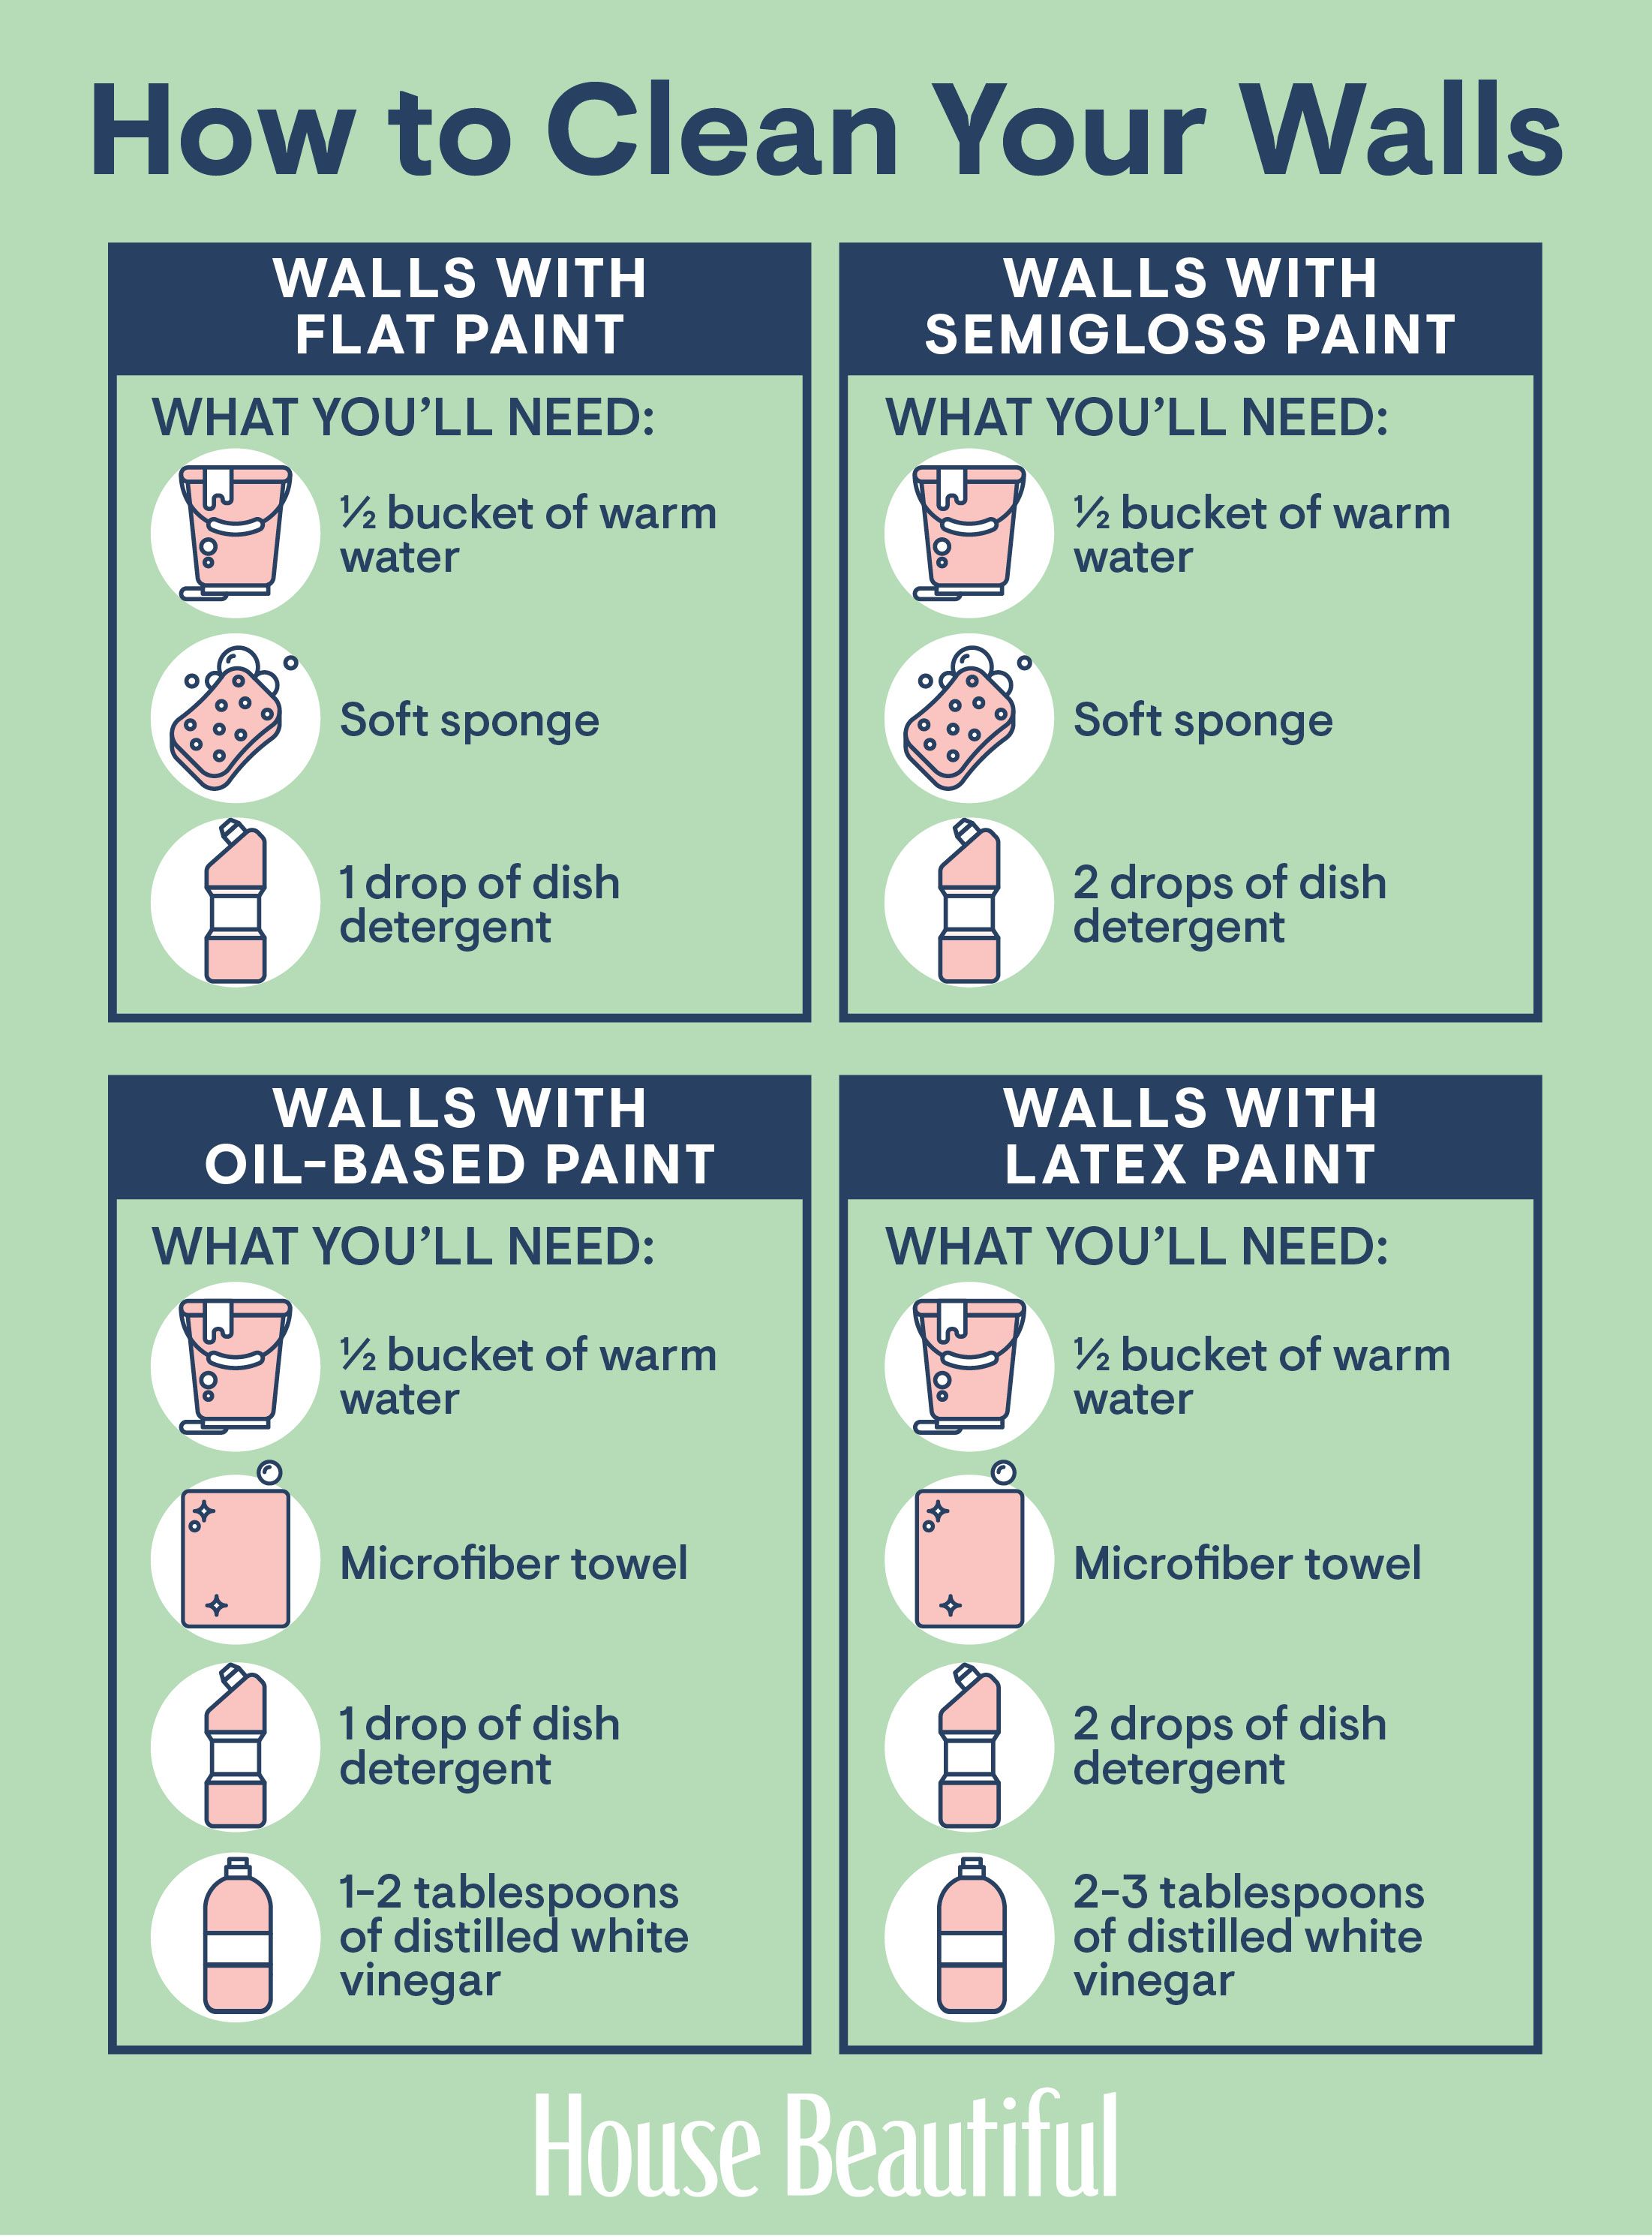 How to Clean Flat Paint